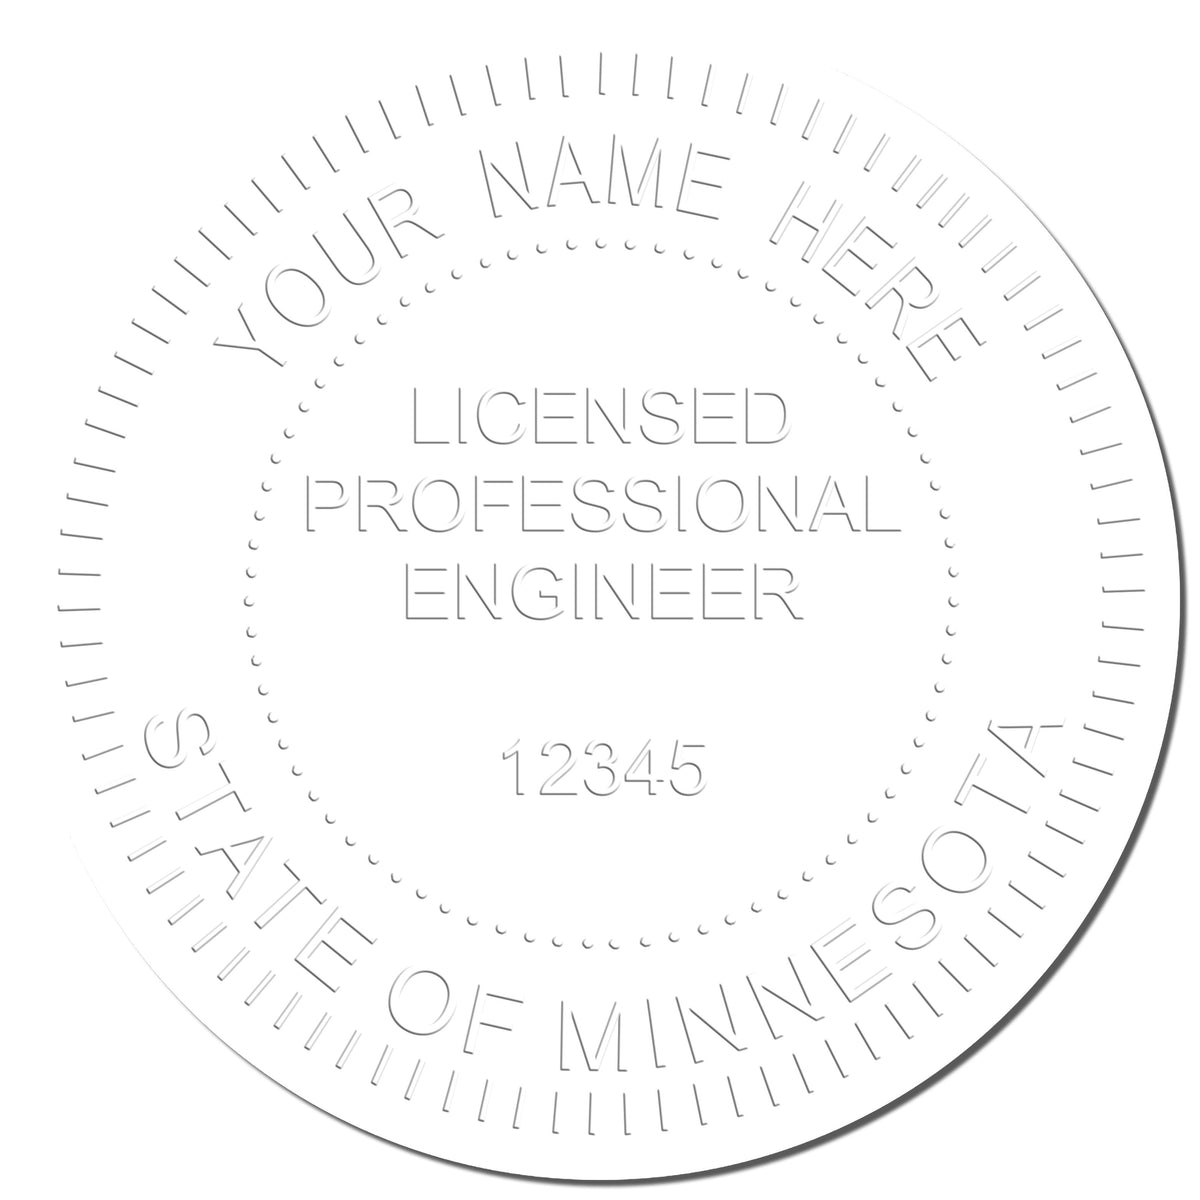 This paper is stamped with a sample imprint of the Gift Minnesota Engineer Seal, signifying its quality and reliability.